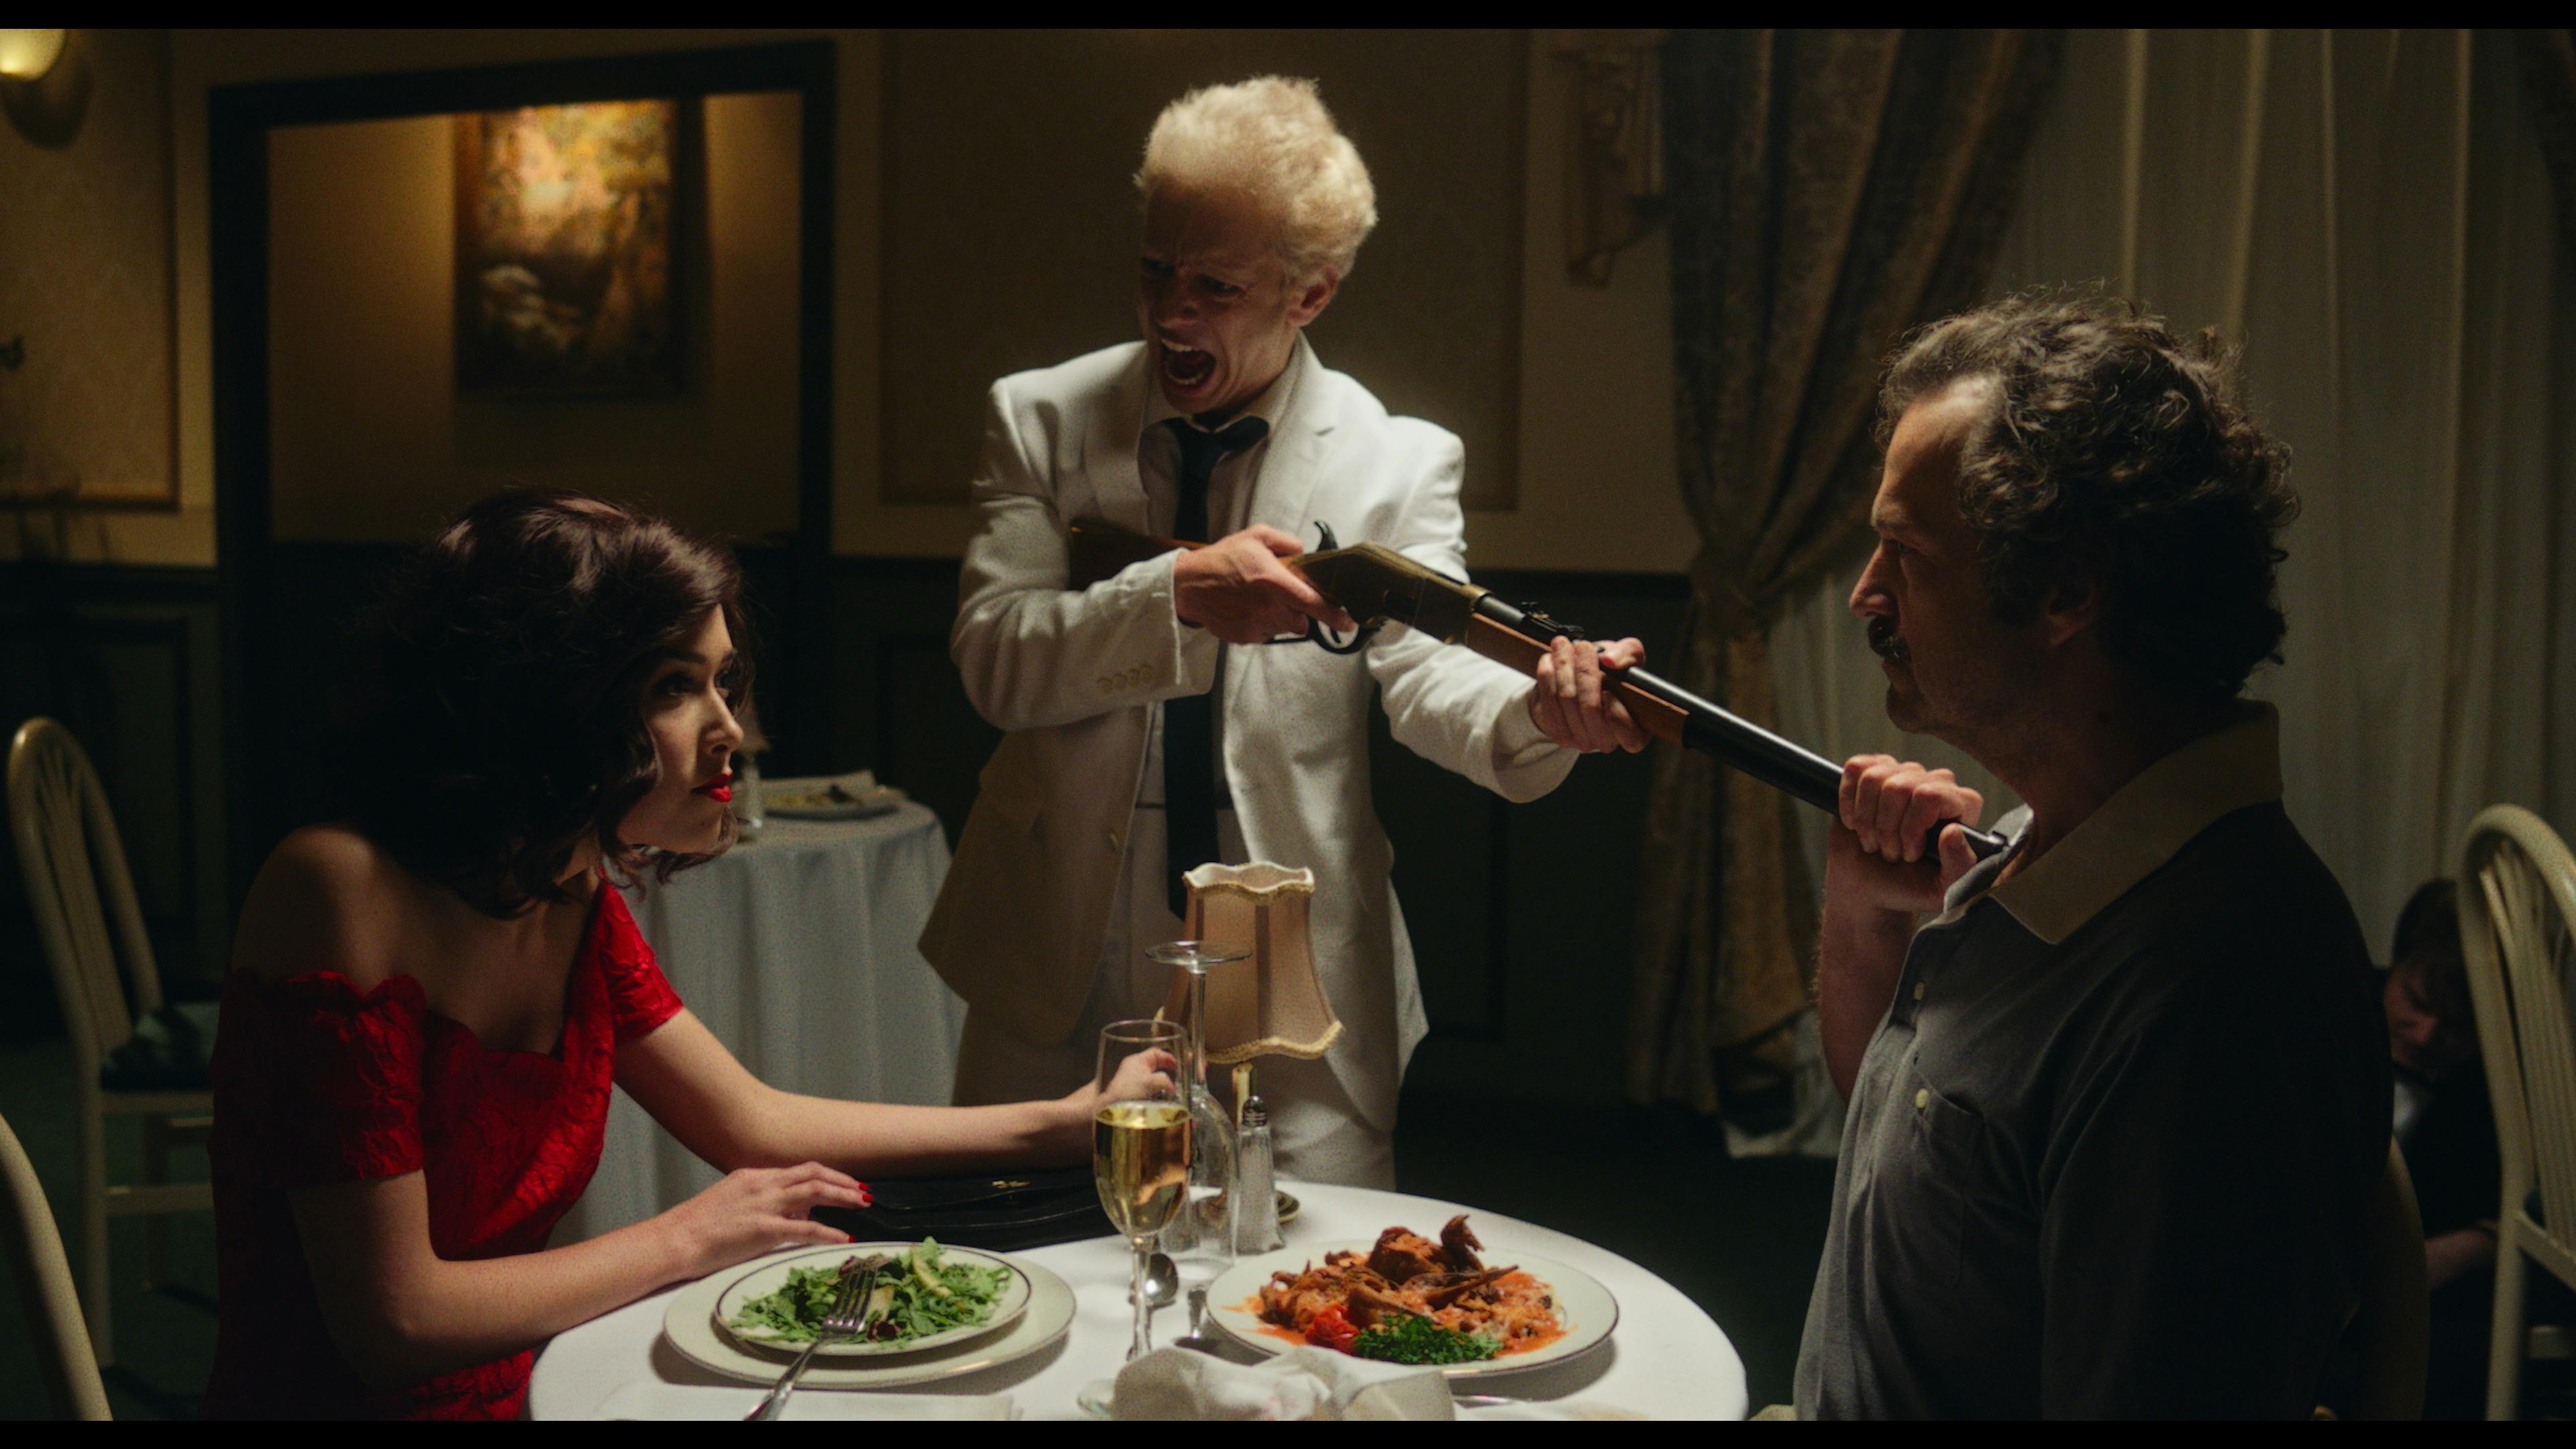 A man in white points a shotgun at a man sitting at dinner with a woman in a red dress